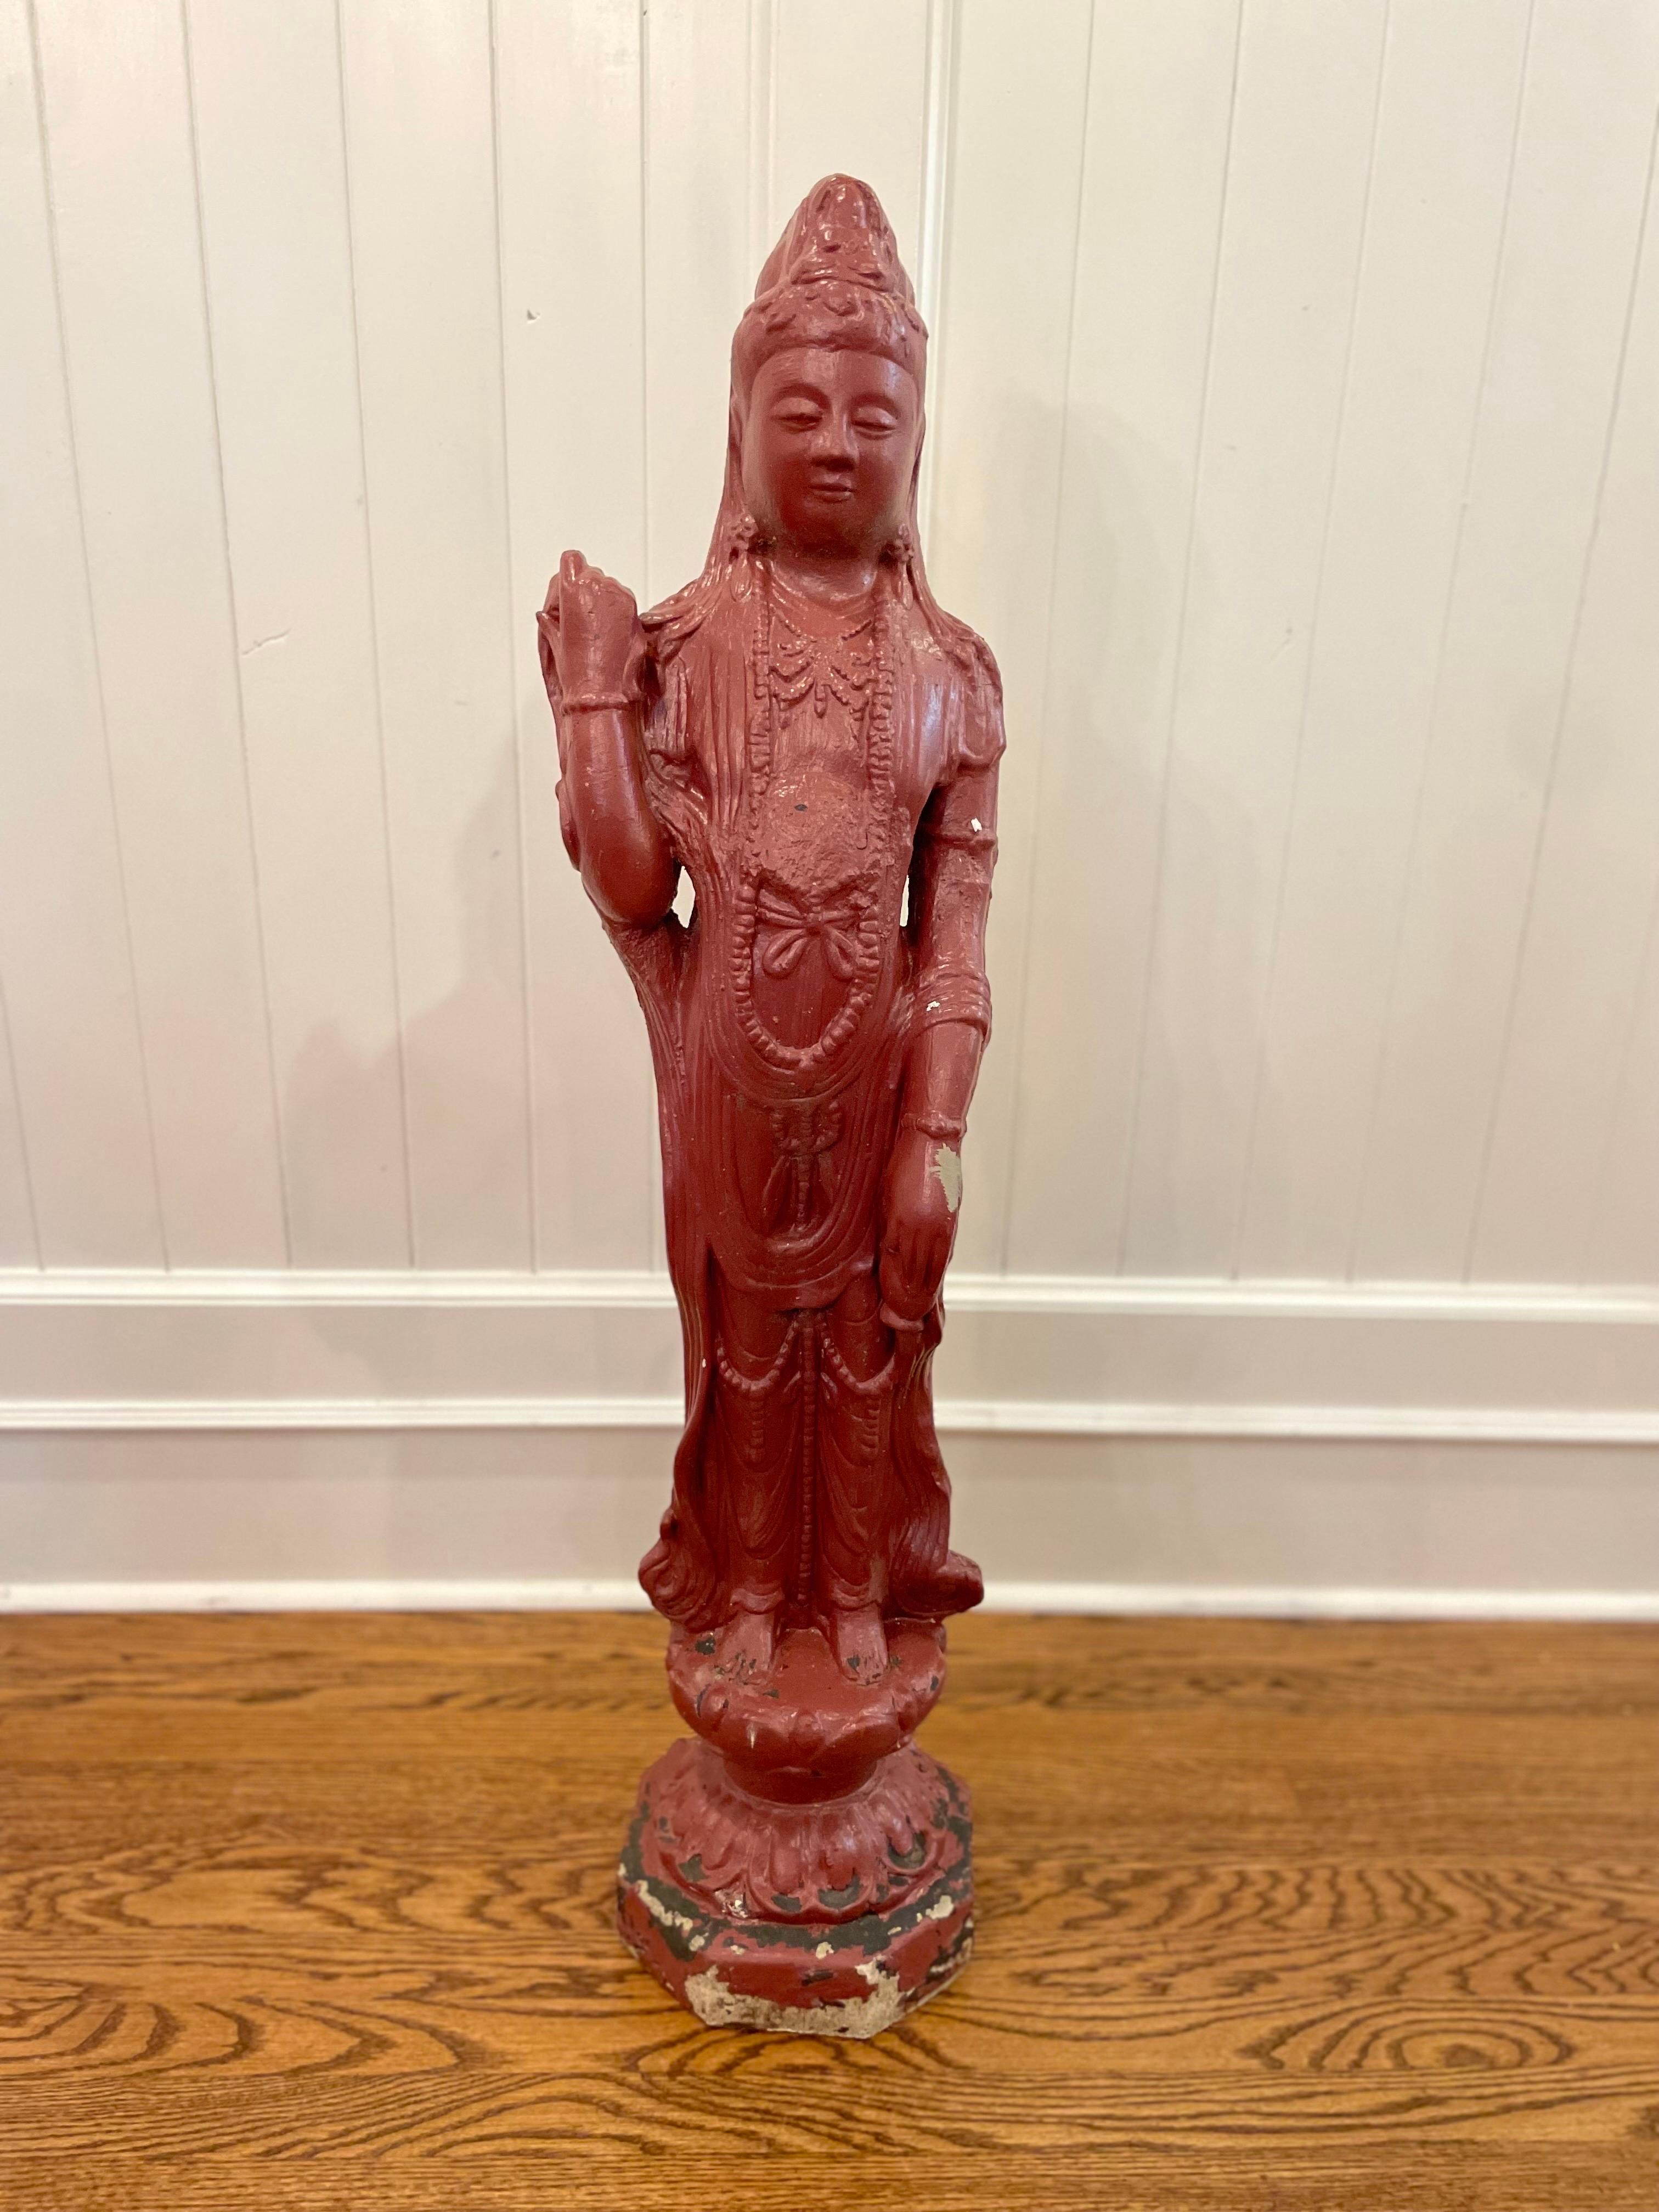 Garden Statue Kwan Guan Yin Asian Budda Goddess of Compassion, Mercy, and Love In Good Condition For Sale In Cookeville, TN